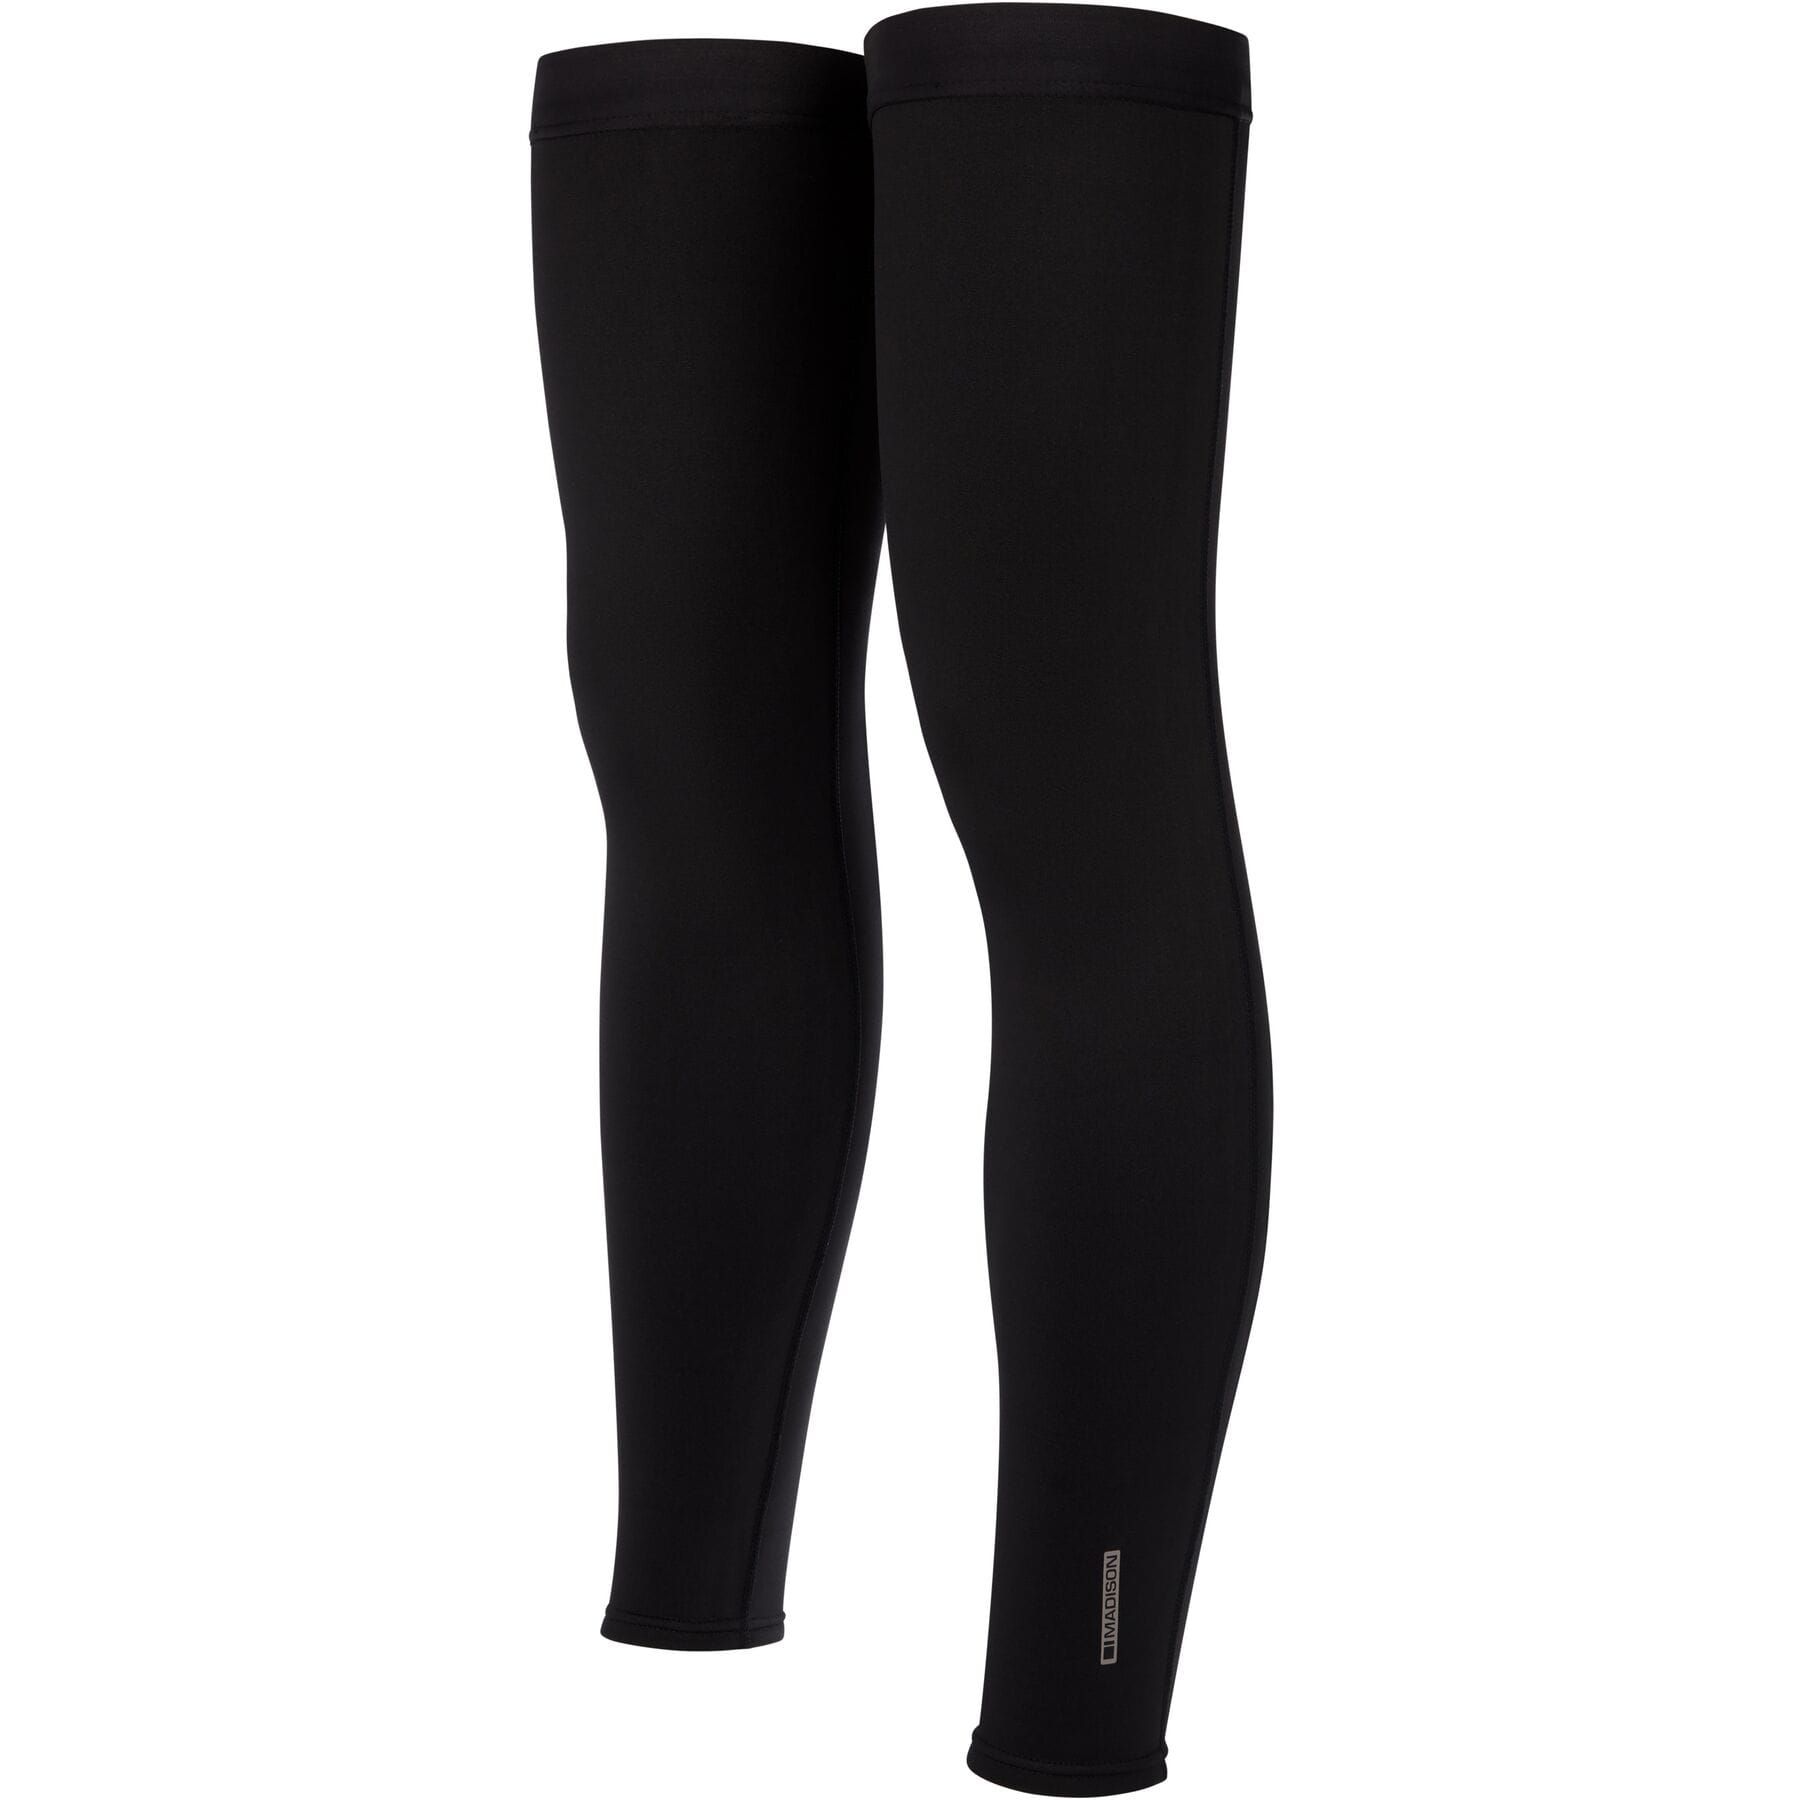 Madison Dte Isoler Thermal Dwr Leg Warmers - £21.24 | Warmers - Leg ...